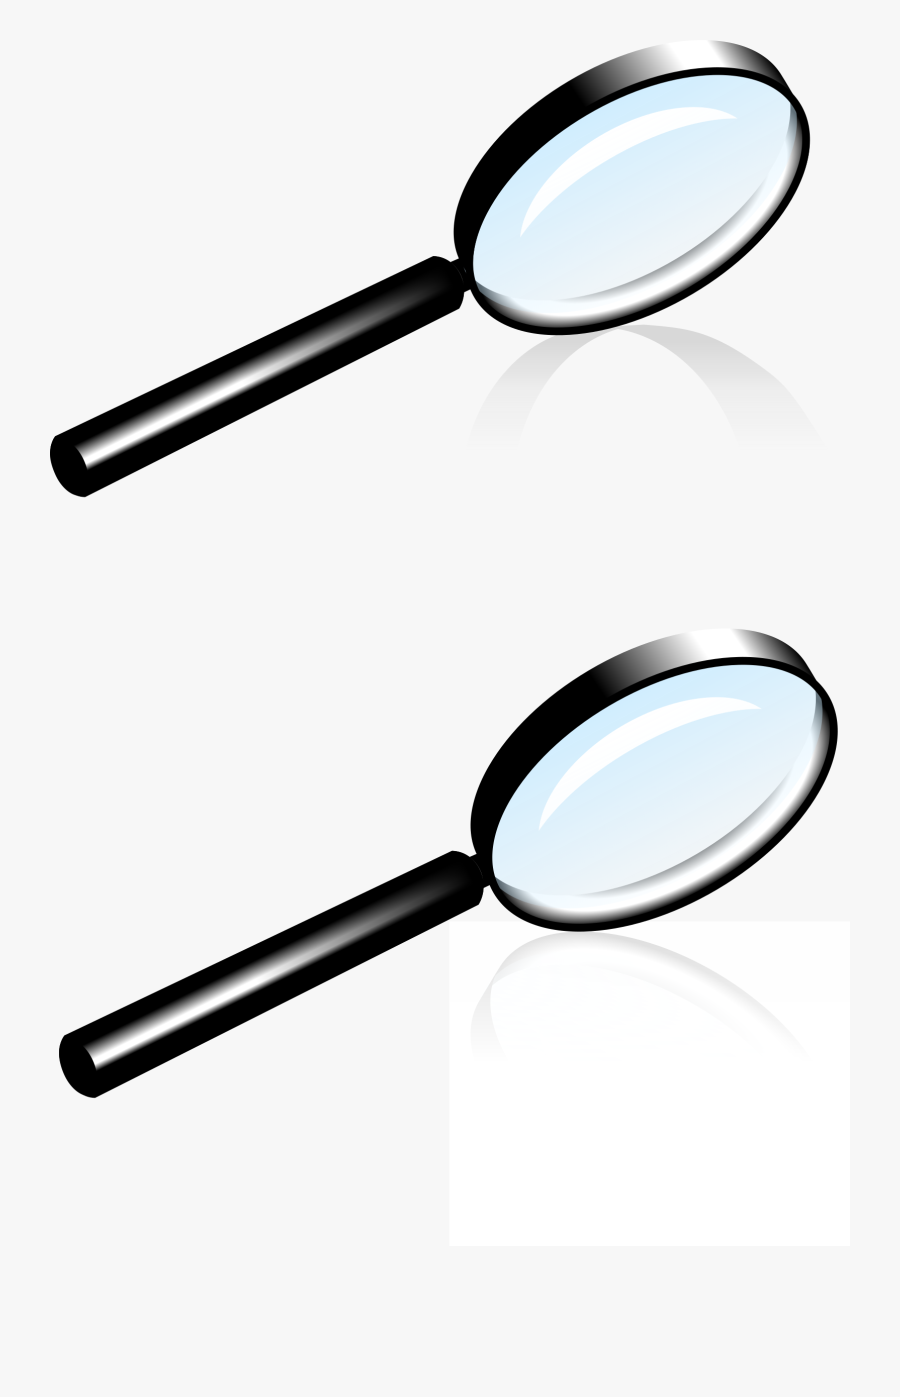 Magnifying Glass - Magnifying Glass Clip Art, Transparent Clipart